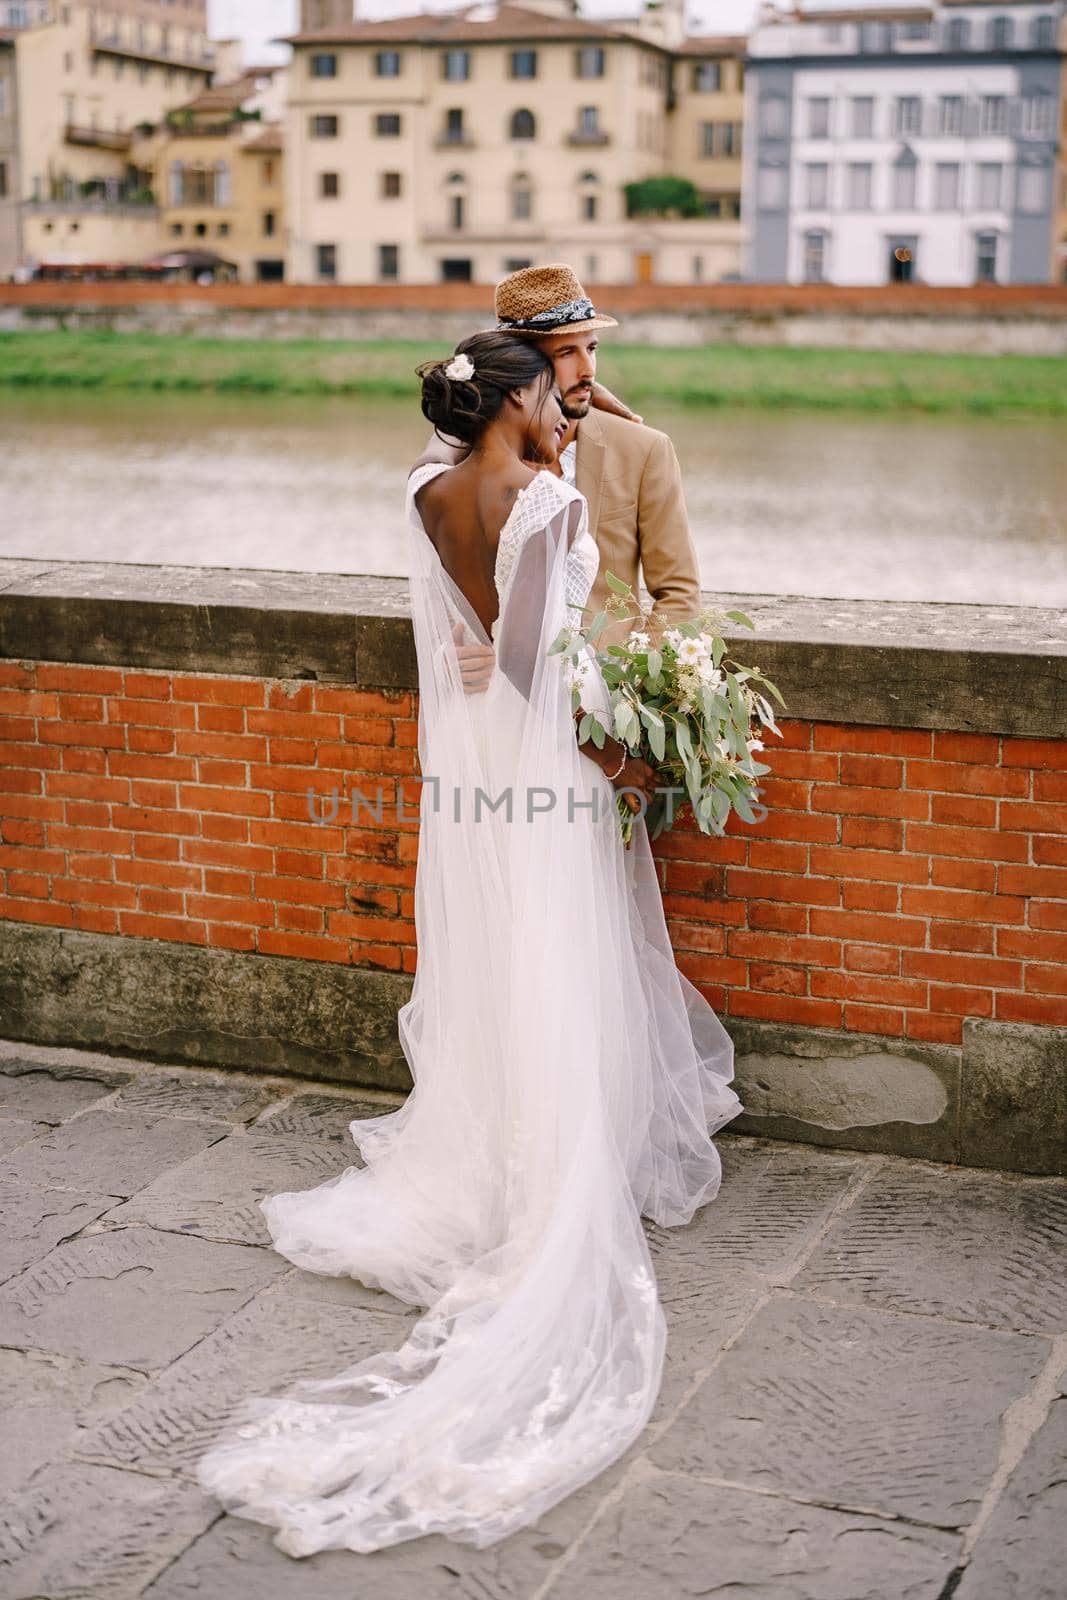 Multiethnic wedding couple. Wedding in Florence, Italy. African-American bride and Caucasian groom stand embracing on the embankment of the Arno River, overlooking the city and bridges. by Nadtochiy